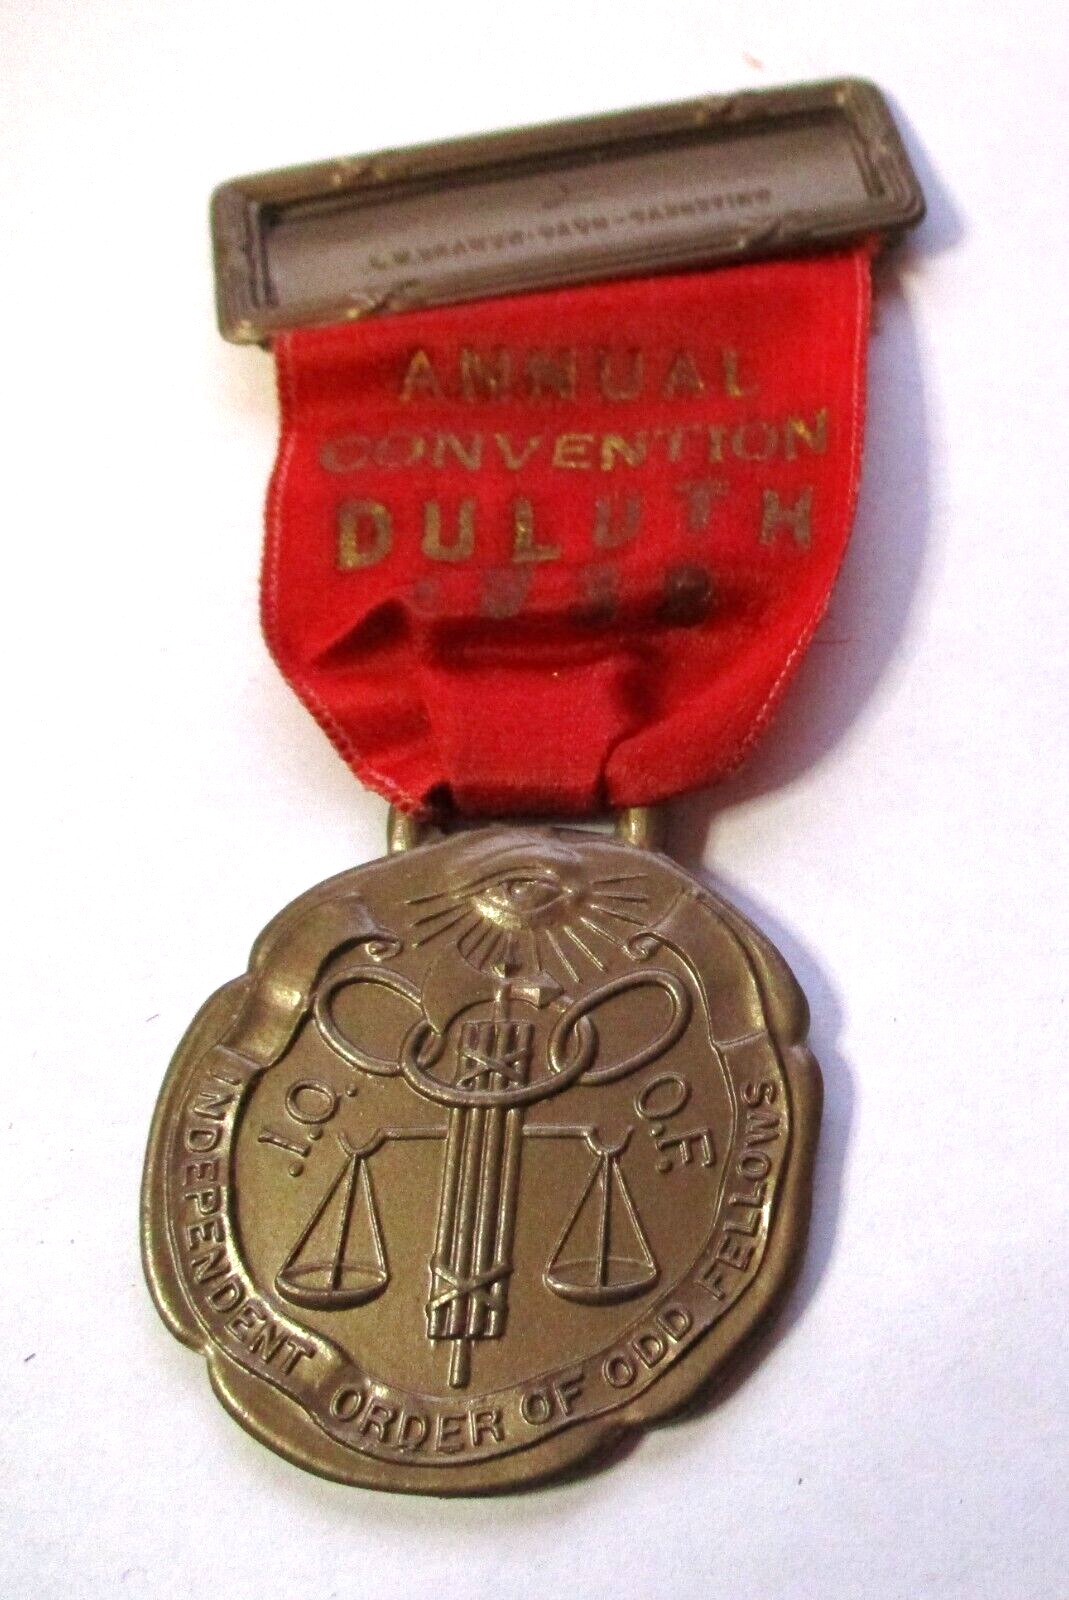 VINTAGE 1938 IOOF INDEPENDENT ORDER of ODD FELLOWS DULUTH MINN. CONVENTION MEDAL Без бренда